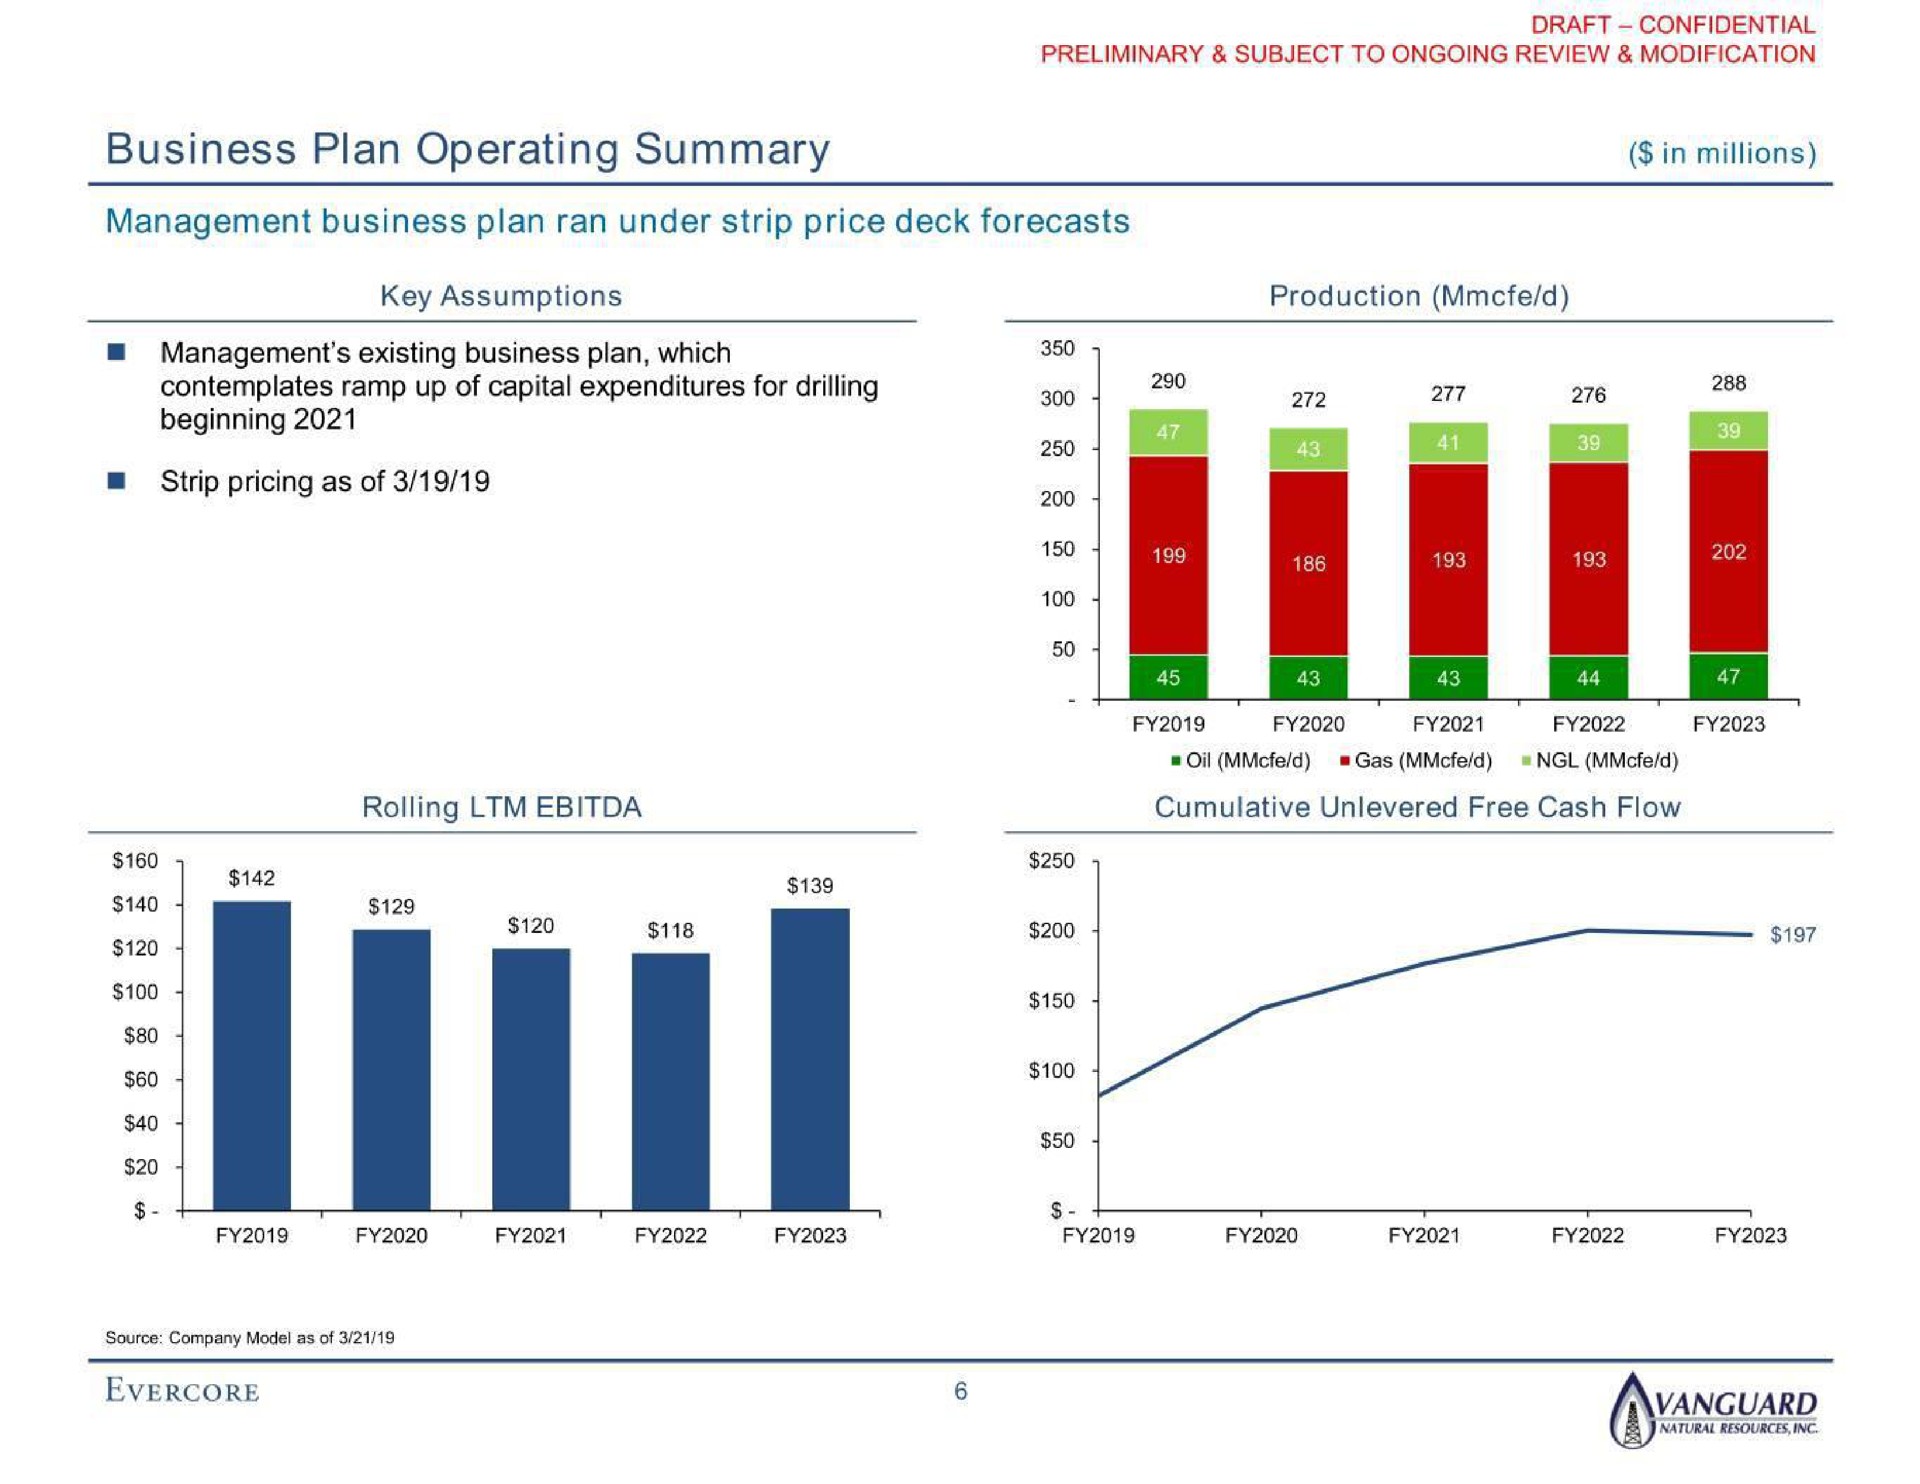 siness plan operating summary management business plan ran under strip price deck forecasts aye | Evercore